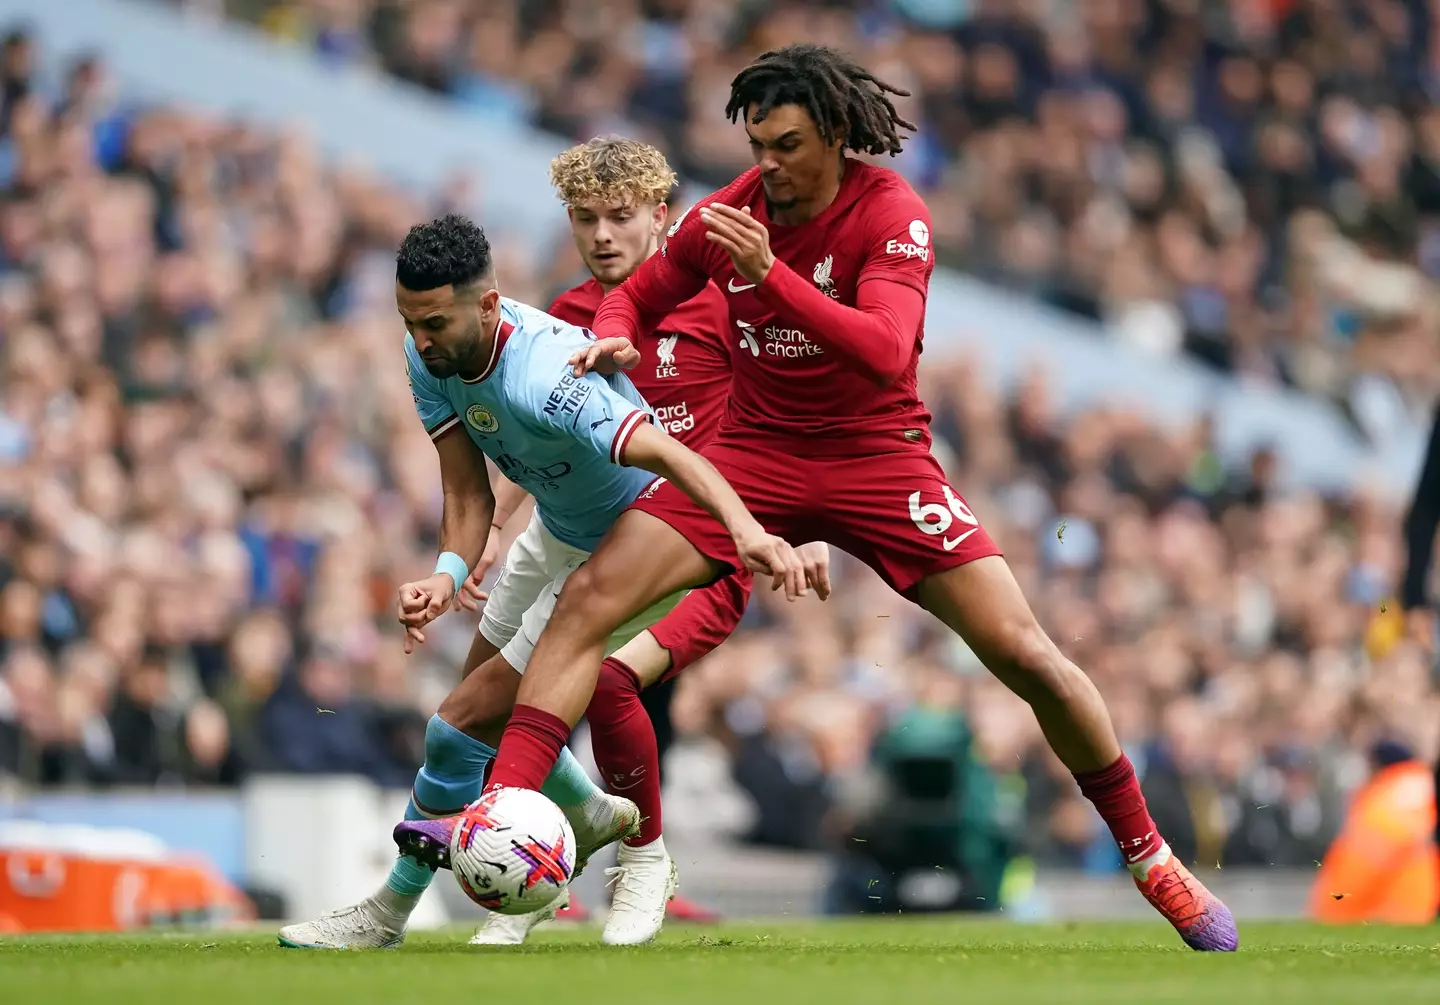 Trent struggled to contain City's wingers on Saturday (Mike Egerton/PA Wire/PA Images)